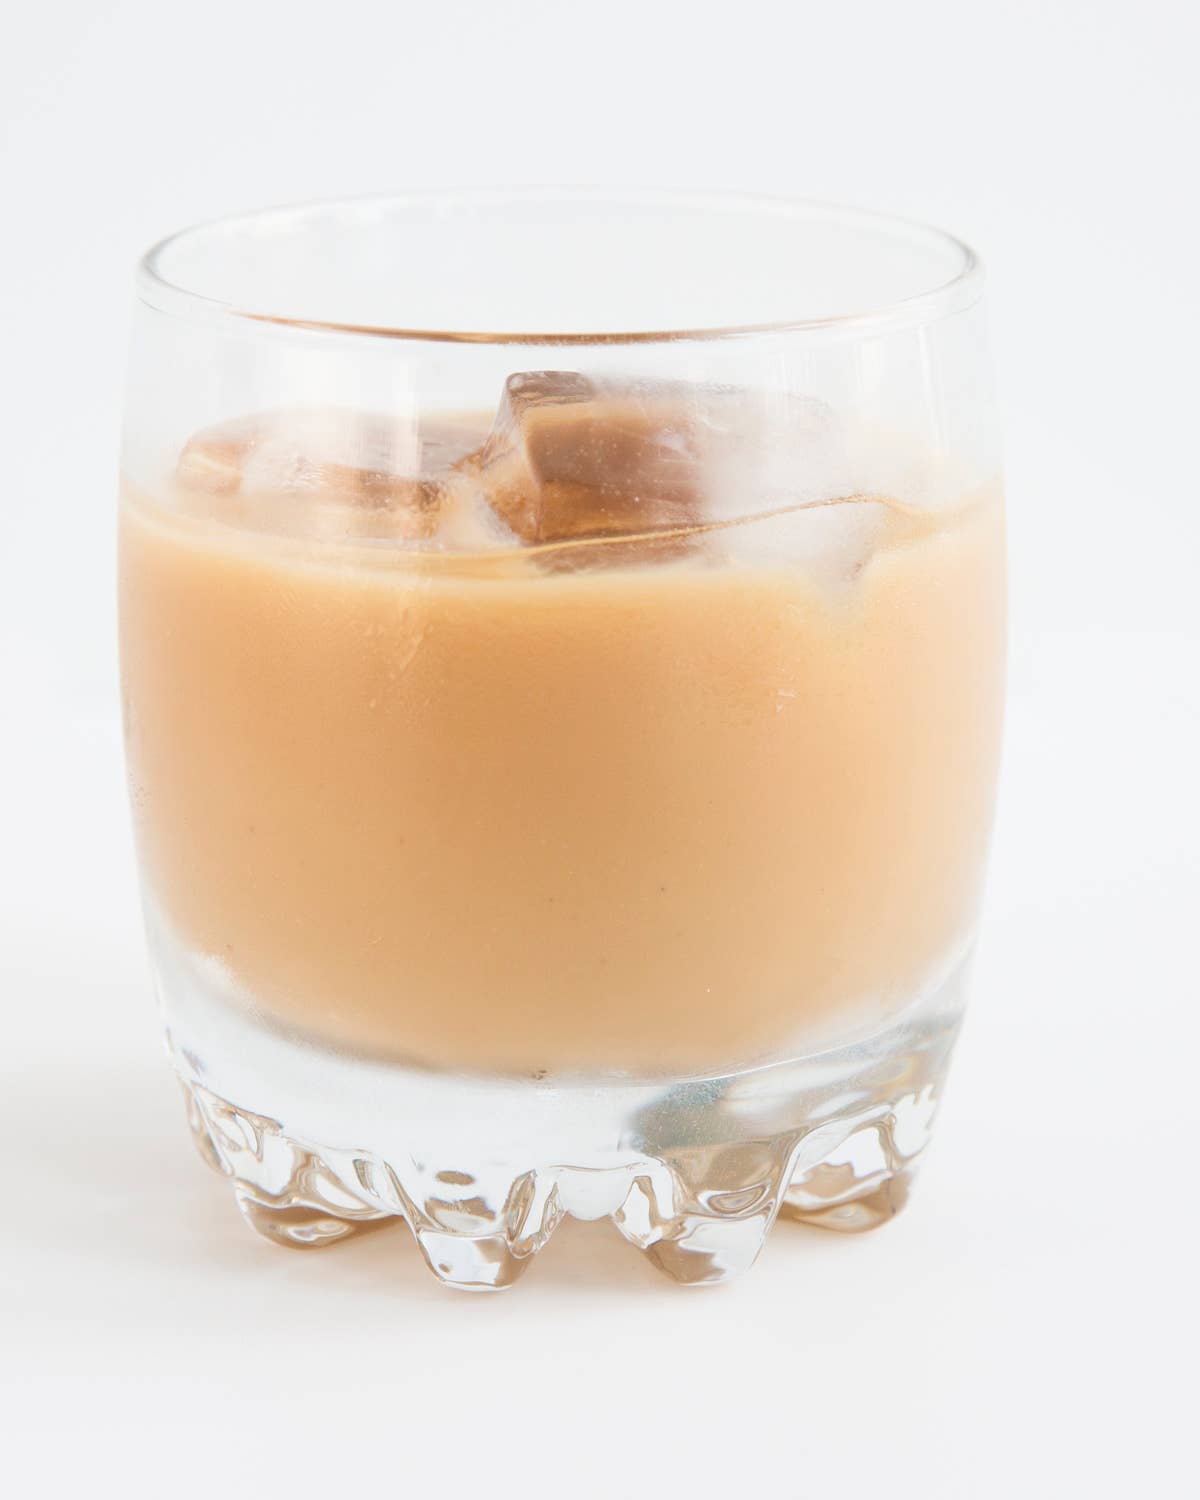 After-Dinner Coffee Meets Digestif in These 9 Cocktails